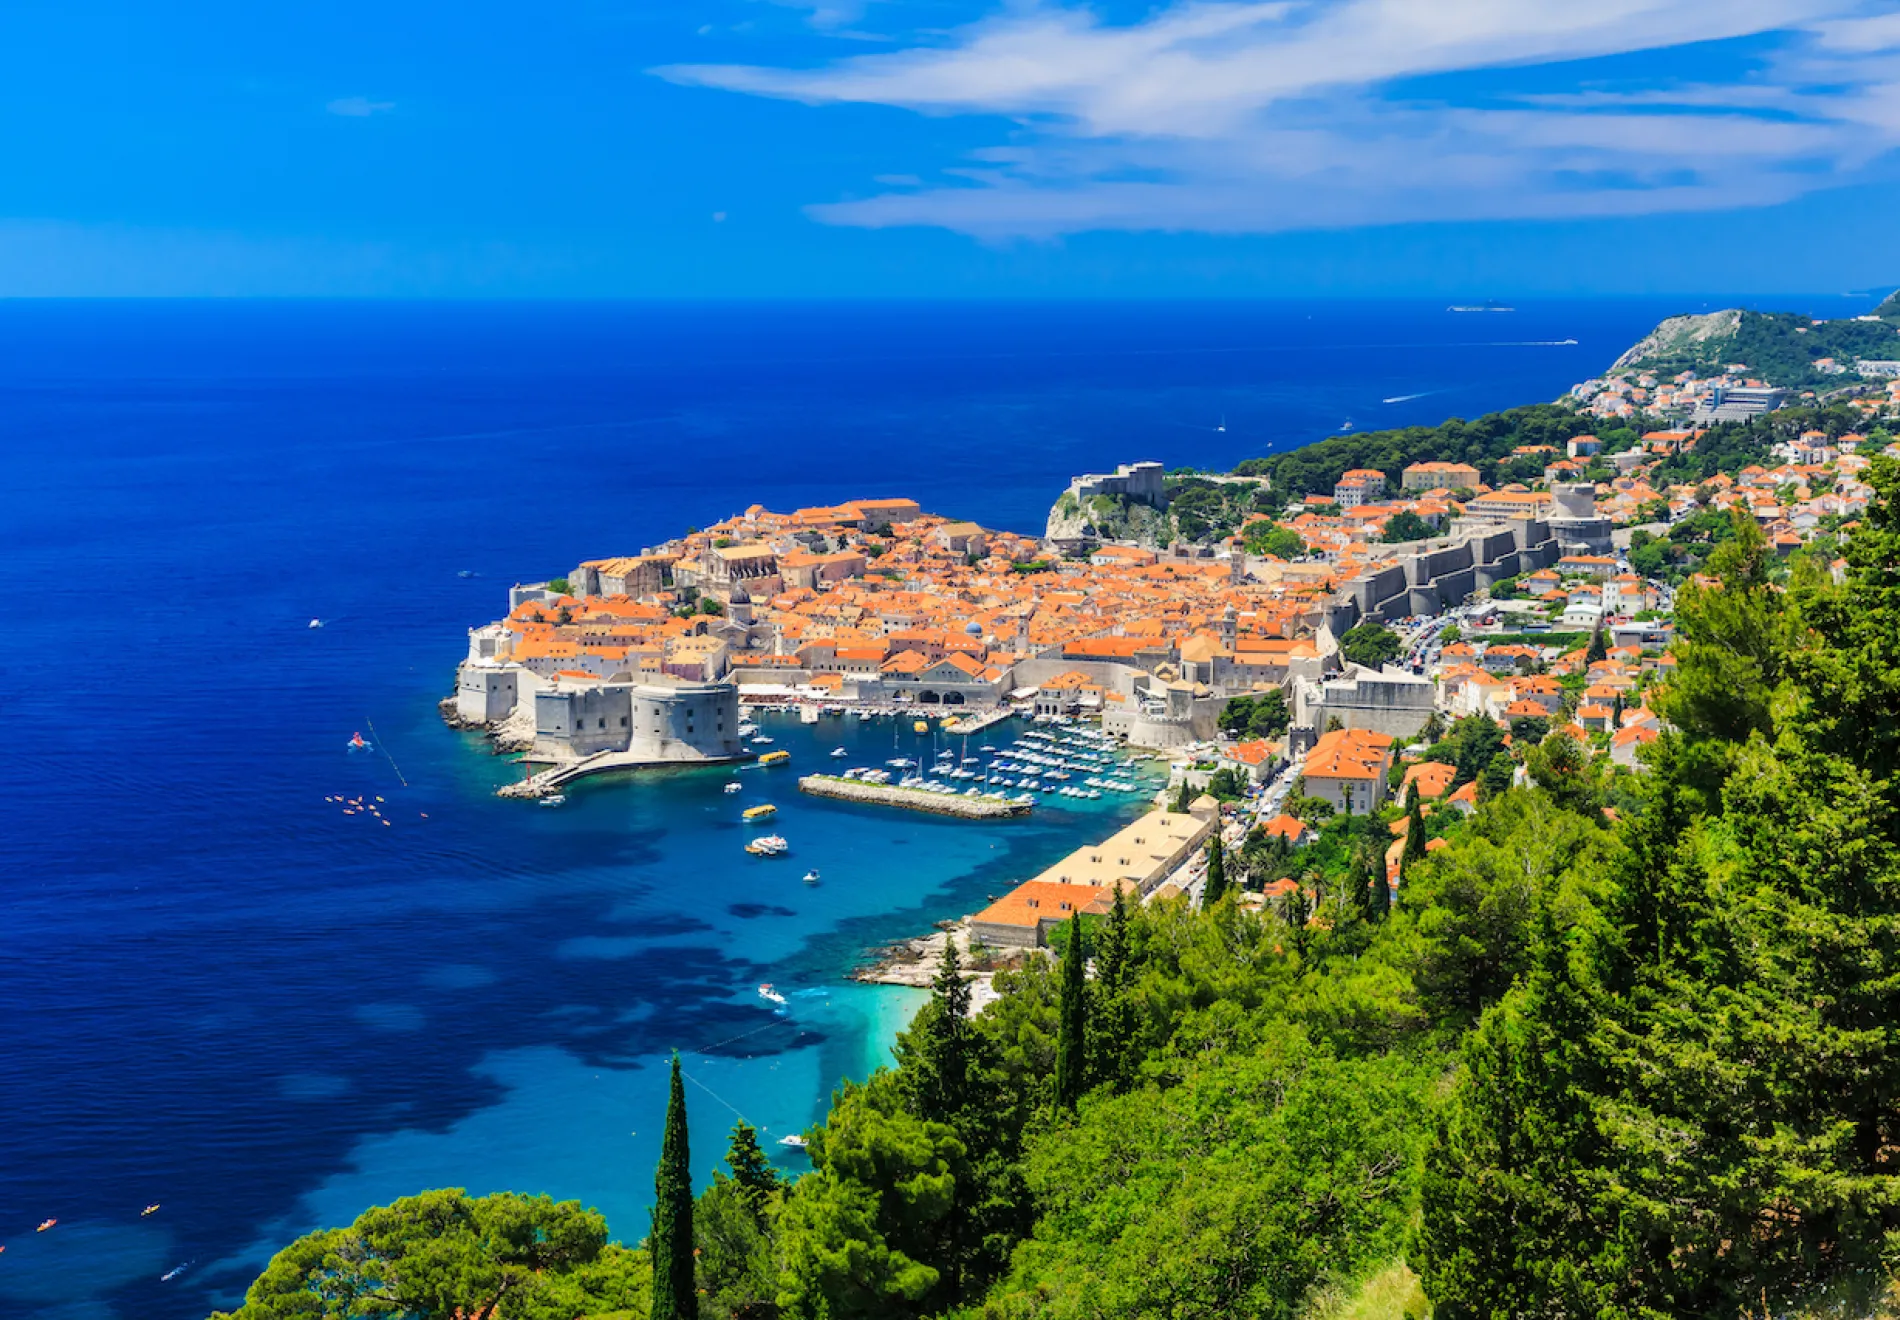 A panoramic view of the walled city Dubrovnik Croatia.